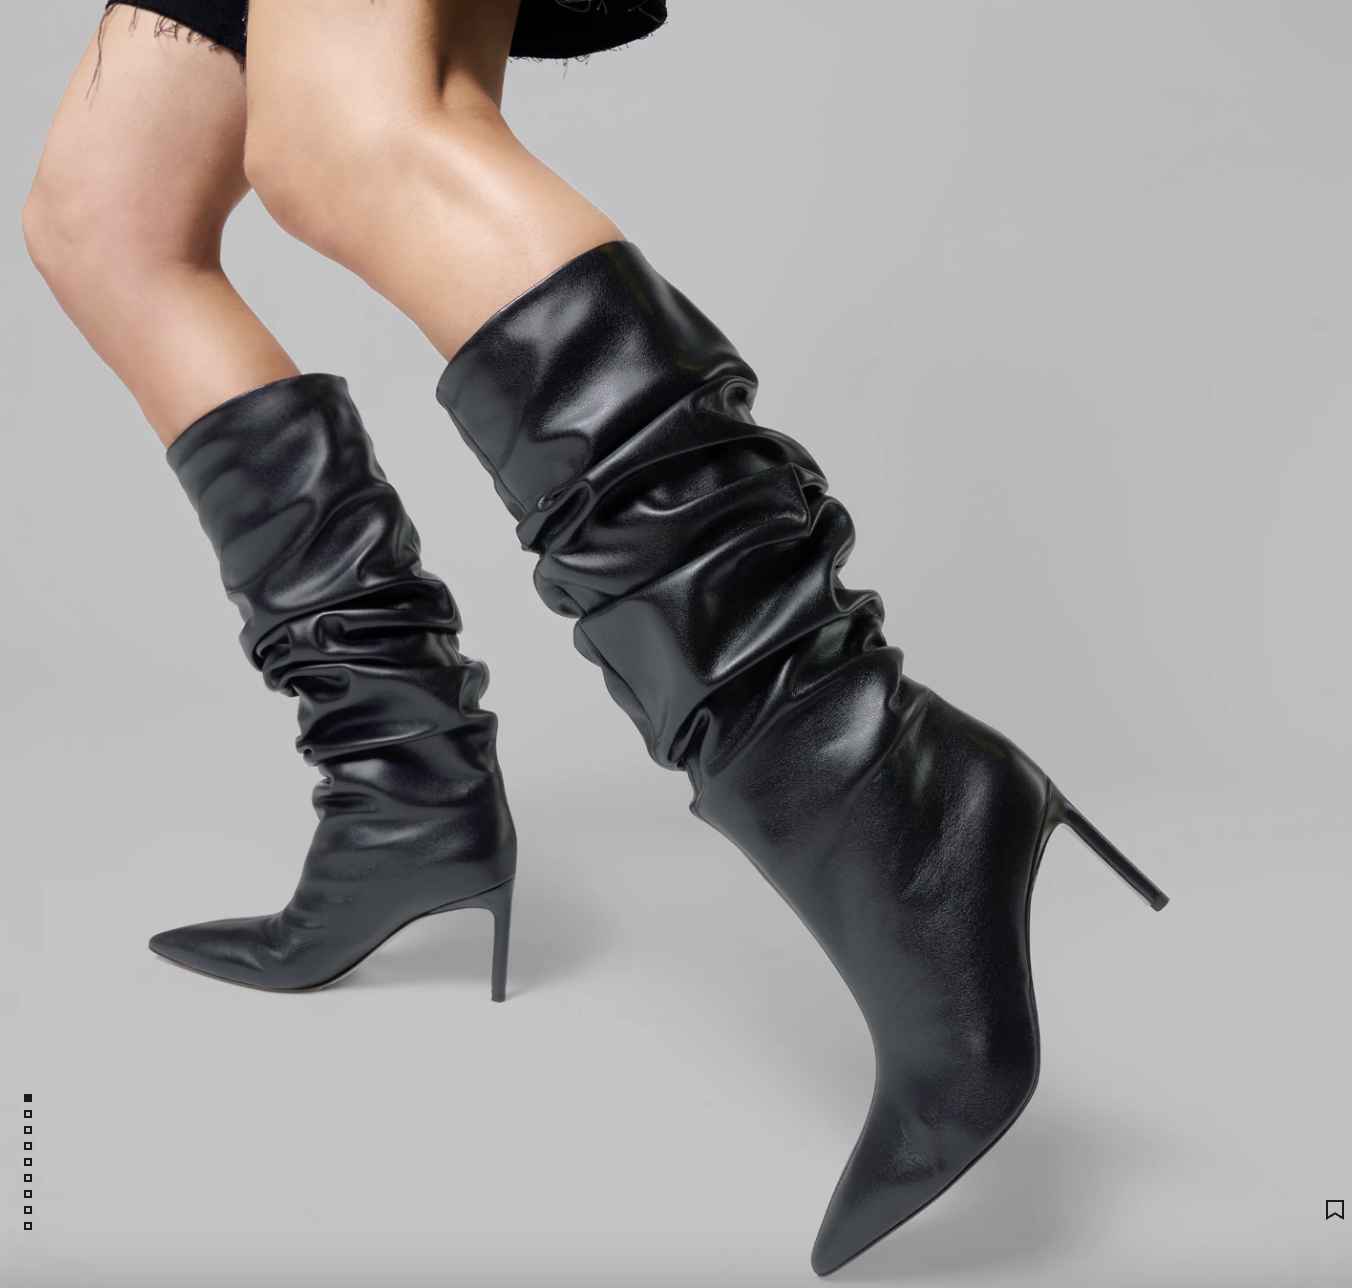 Kiss Kriss Women's pointed toe boots with heel: for sale at 29.99€ on  Mecshopping.it